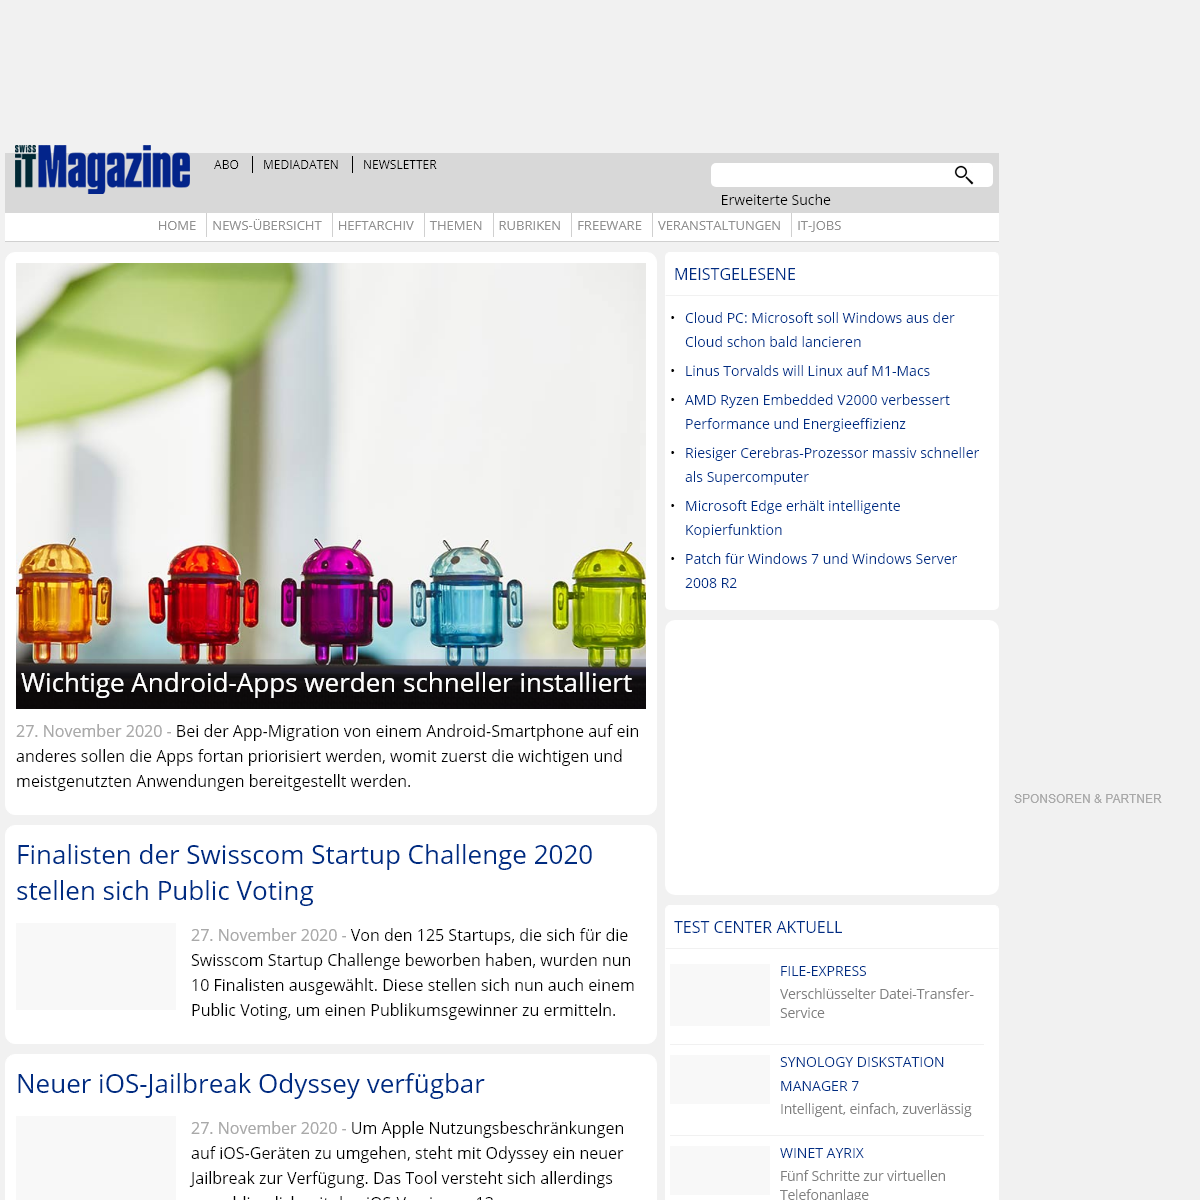 A complete backup of itmagazine.ch